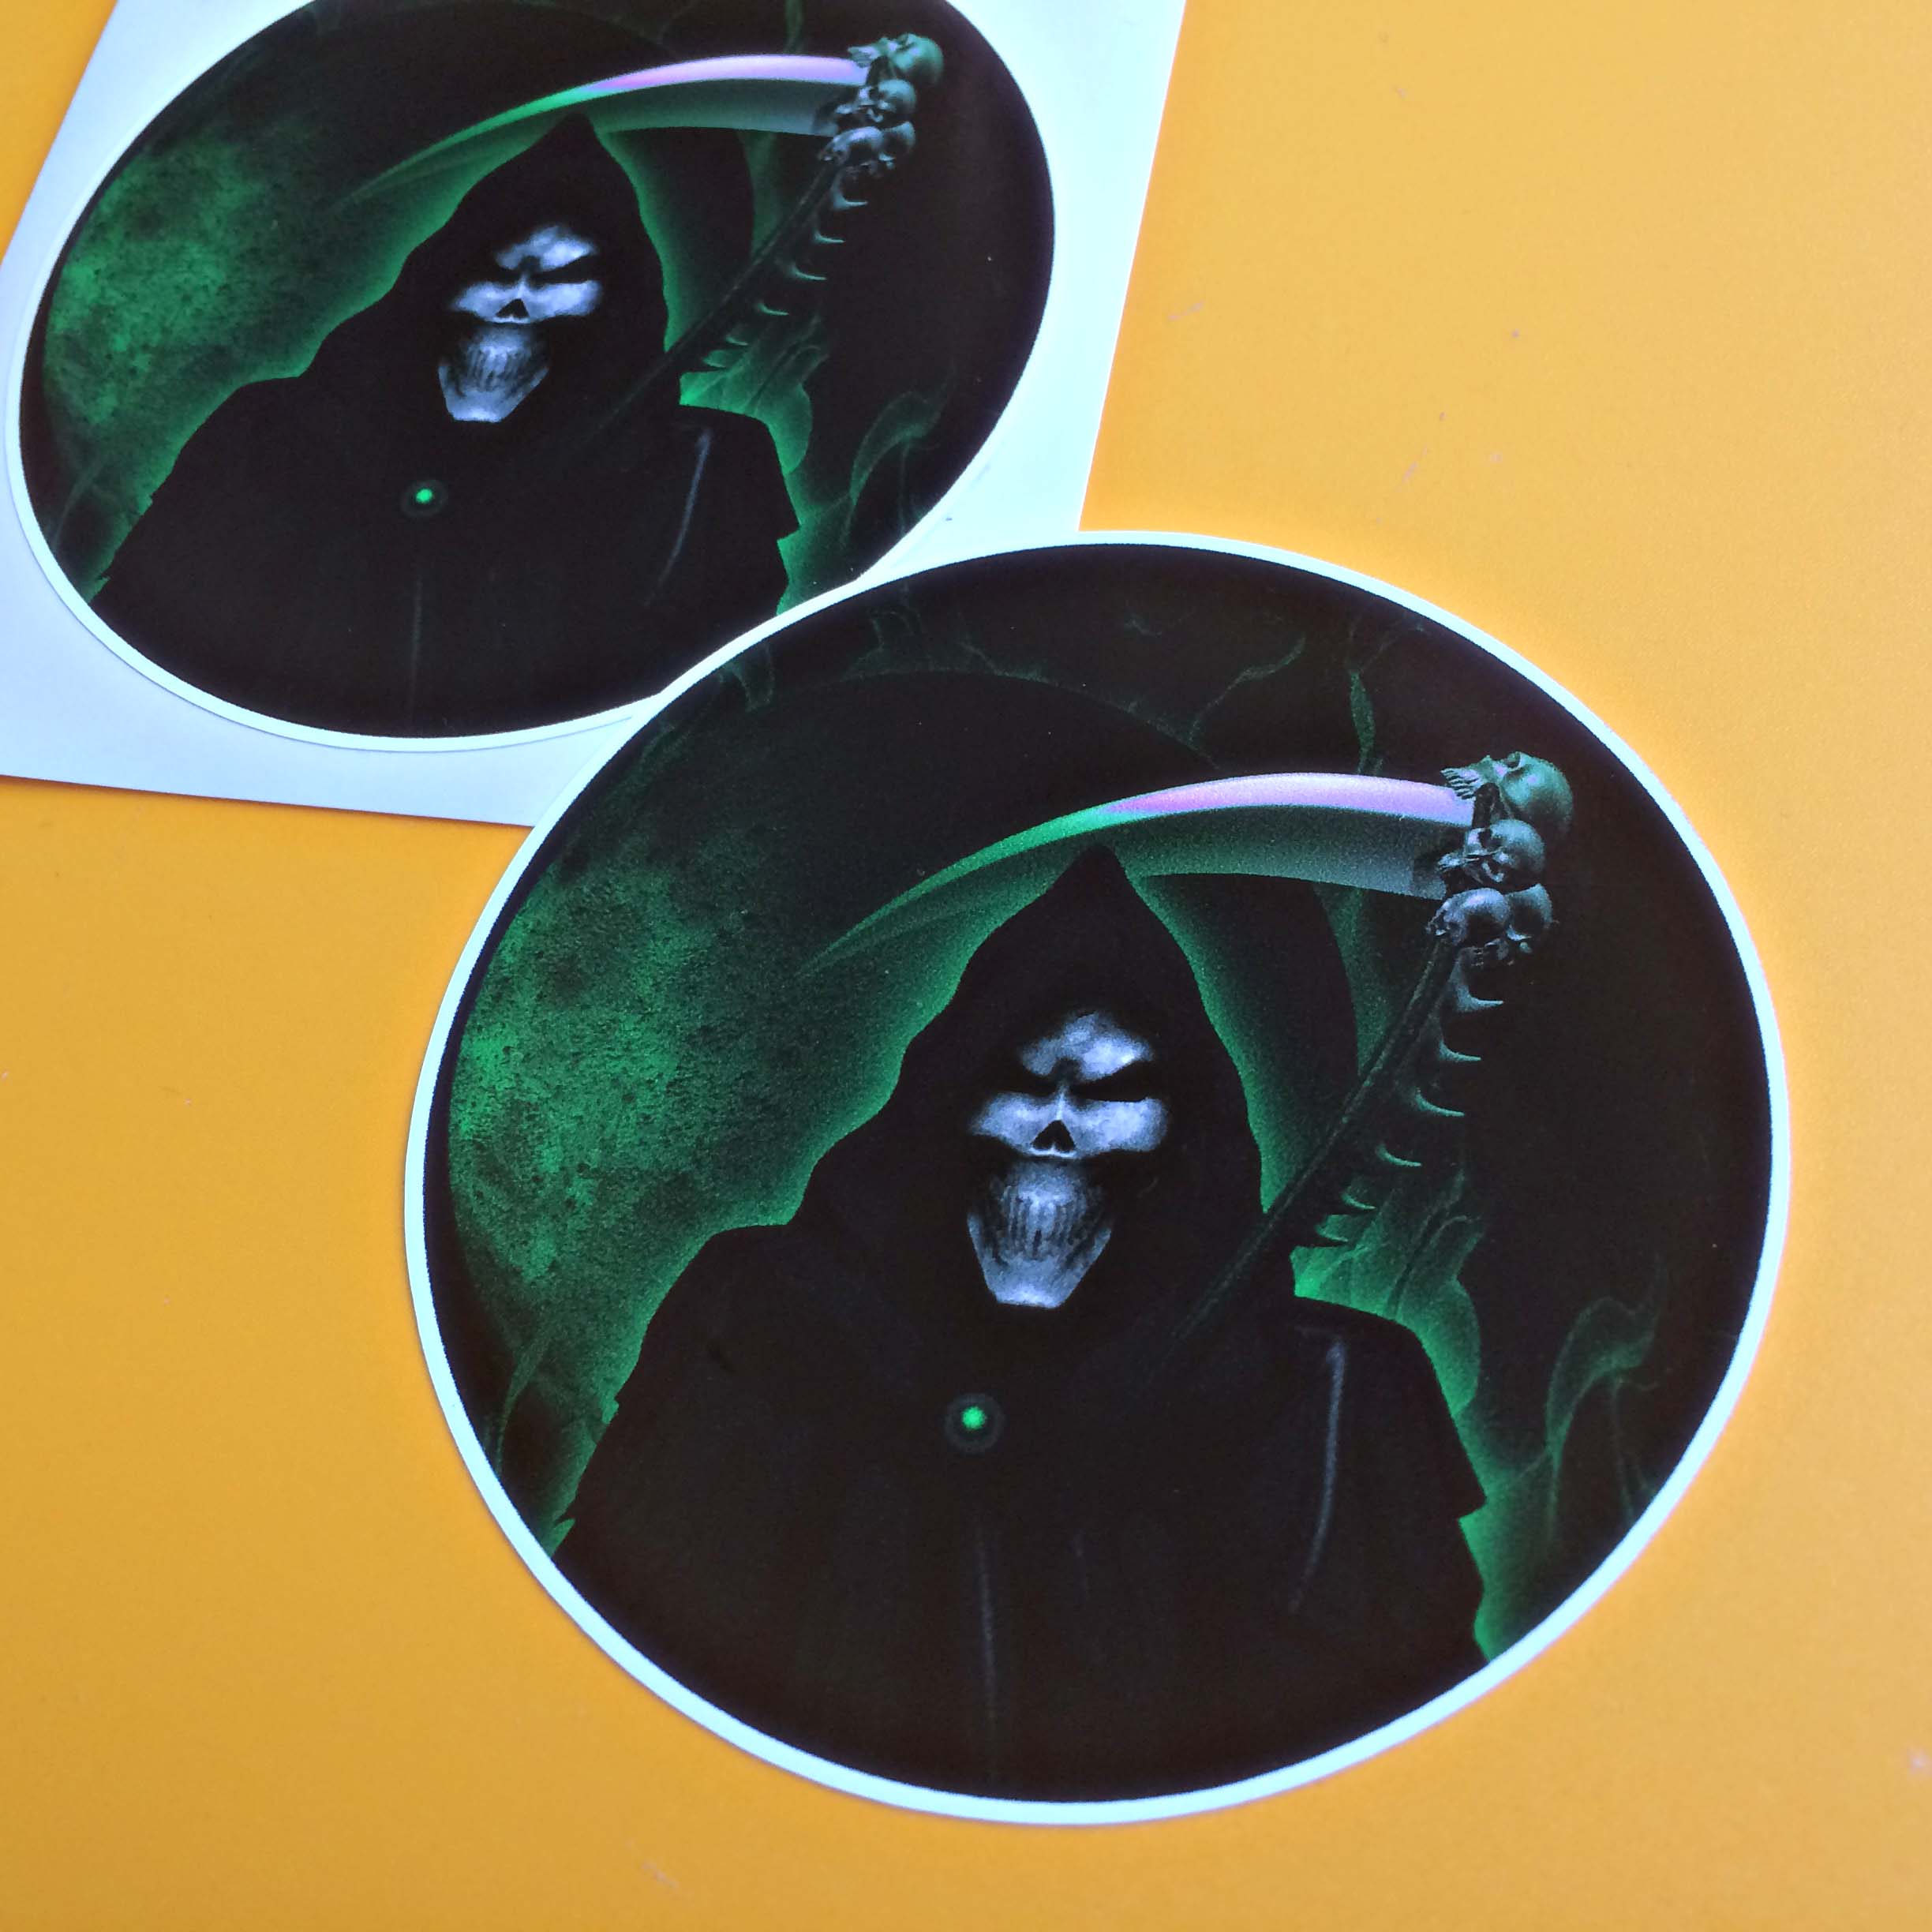 GRIM REAPER STICKERS. The grim reaper, a skeletal figure in a dark hooded robe carrying a scythe with skulls attached. The sky is a mist of black and green.